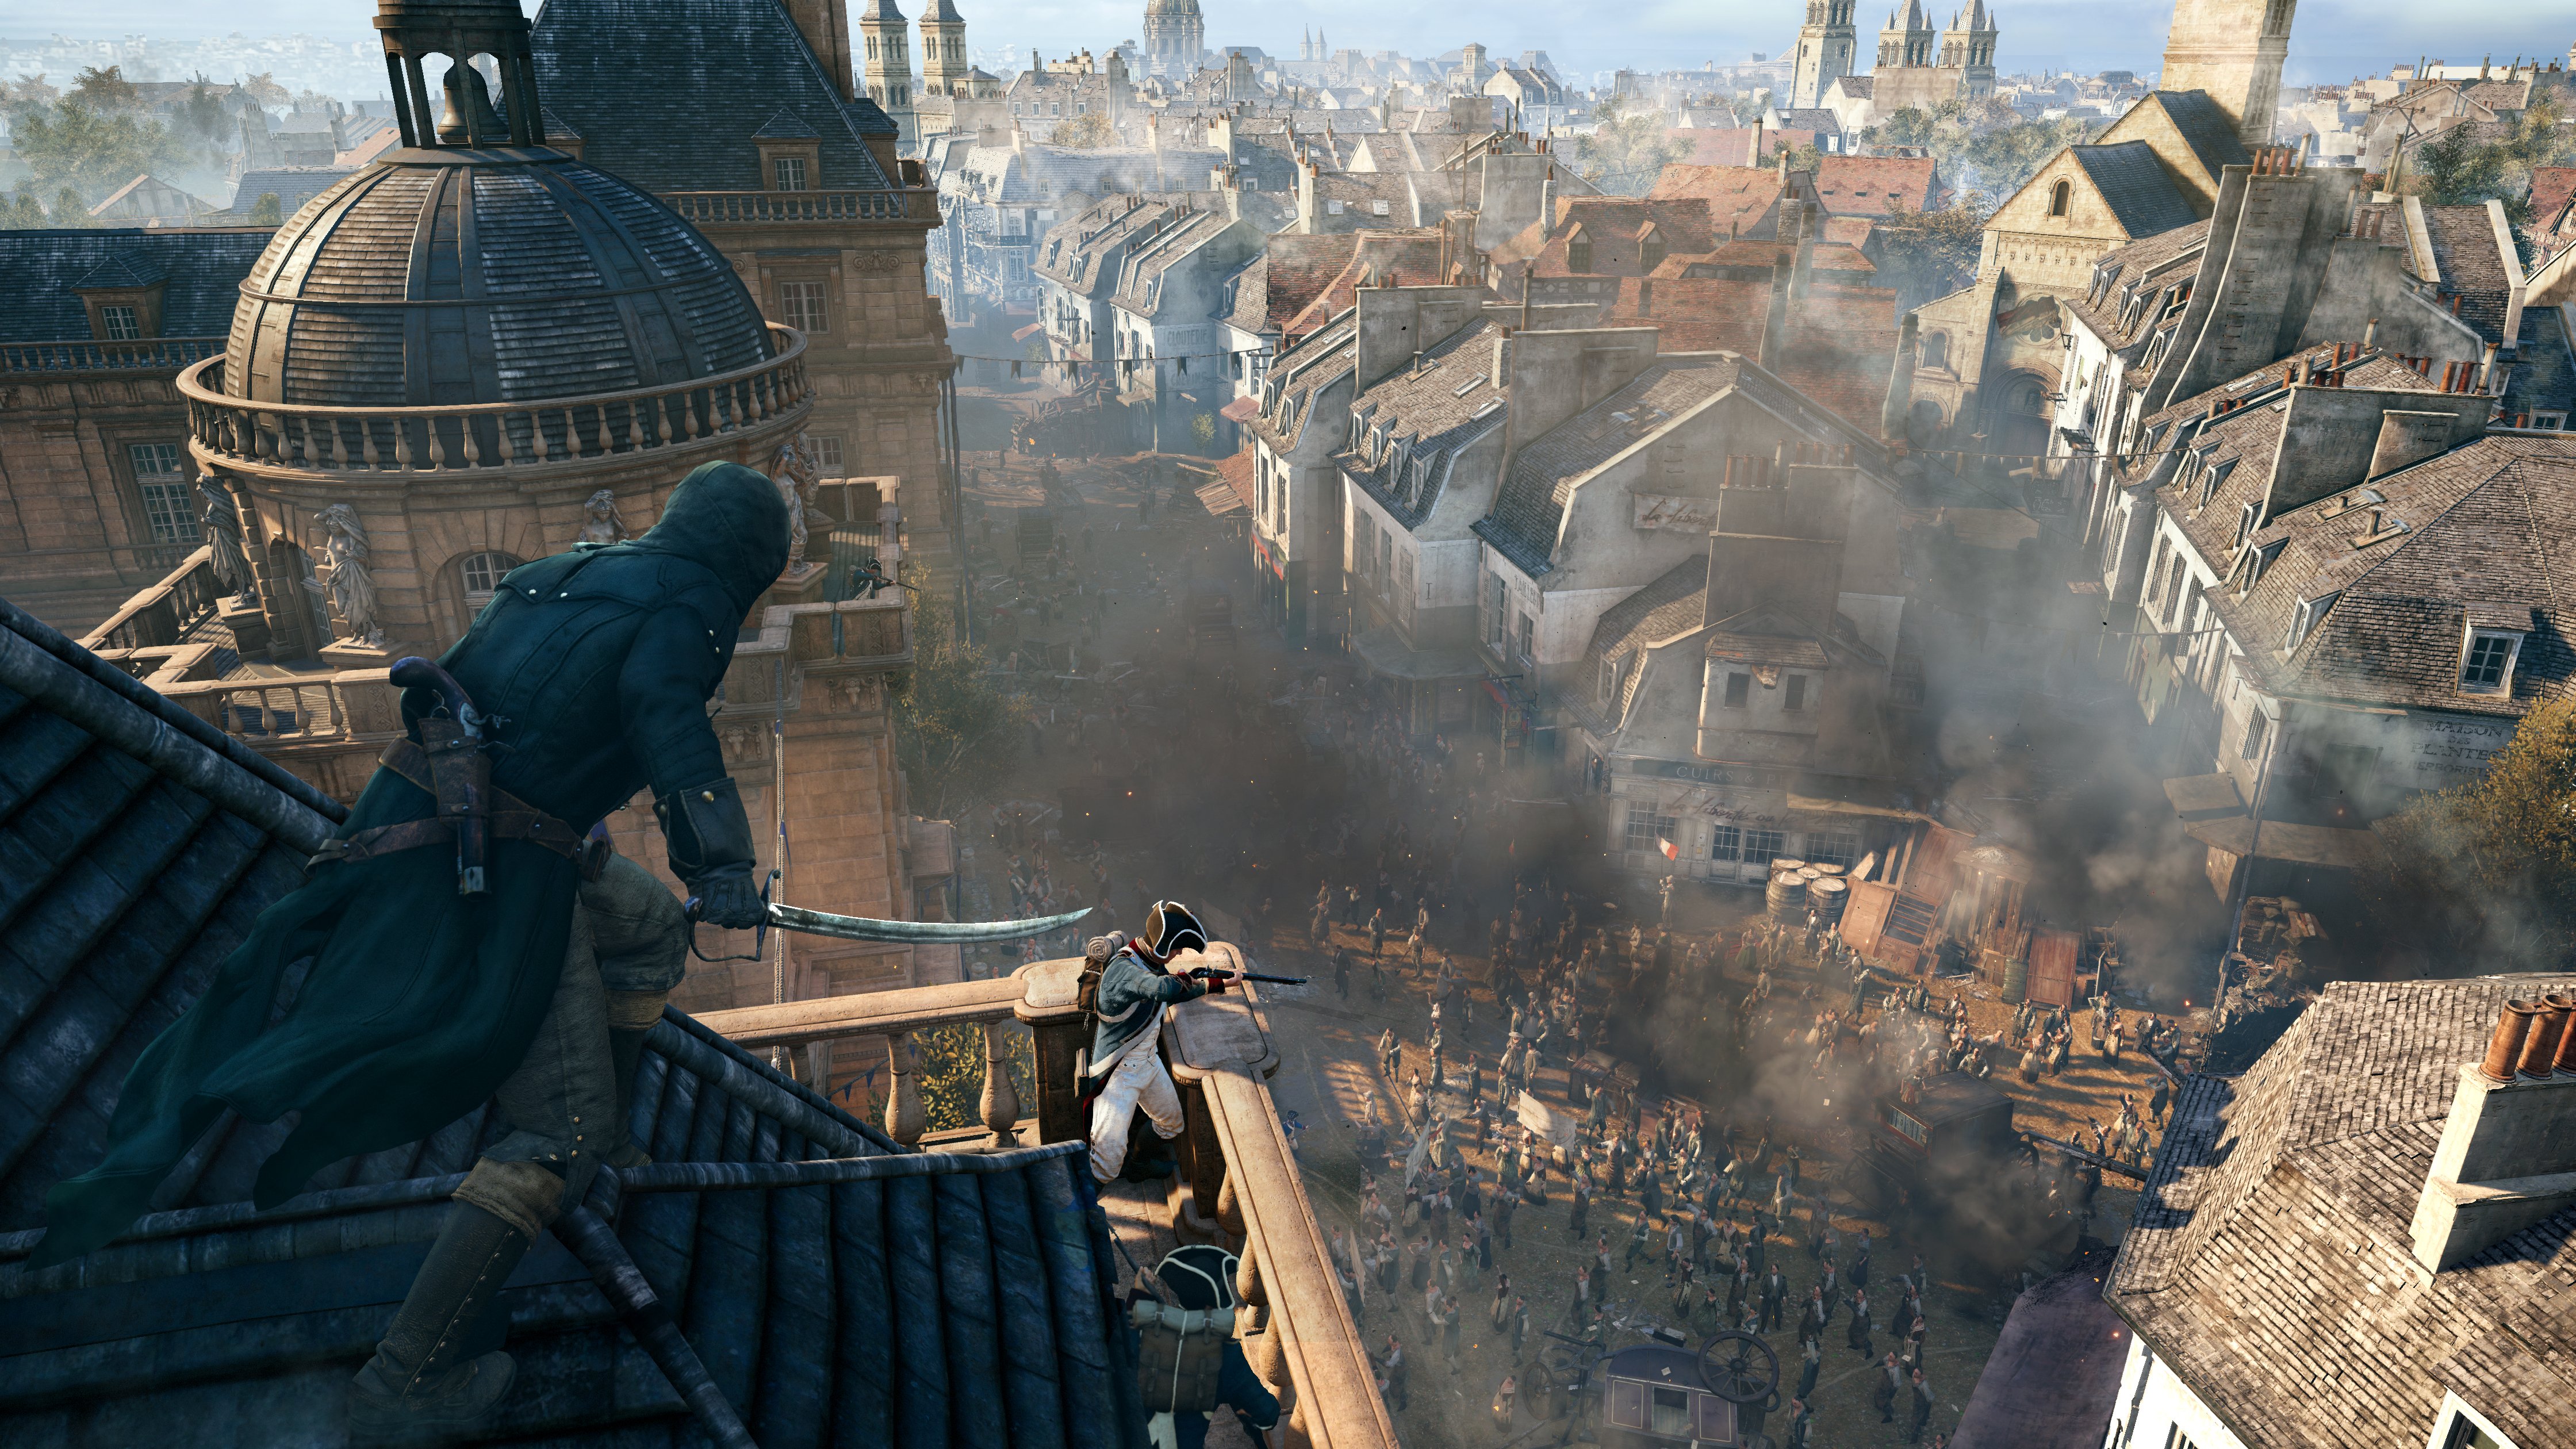 Wallpaper, 4480x2520 px, action, adventure, assassins, creed, fantasy, fighting, Unity, warrior 4480x2520